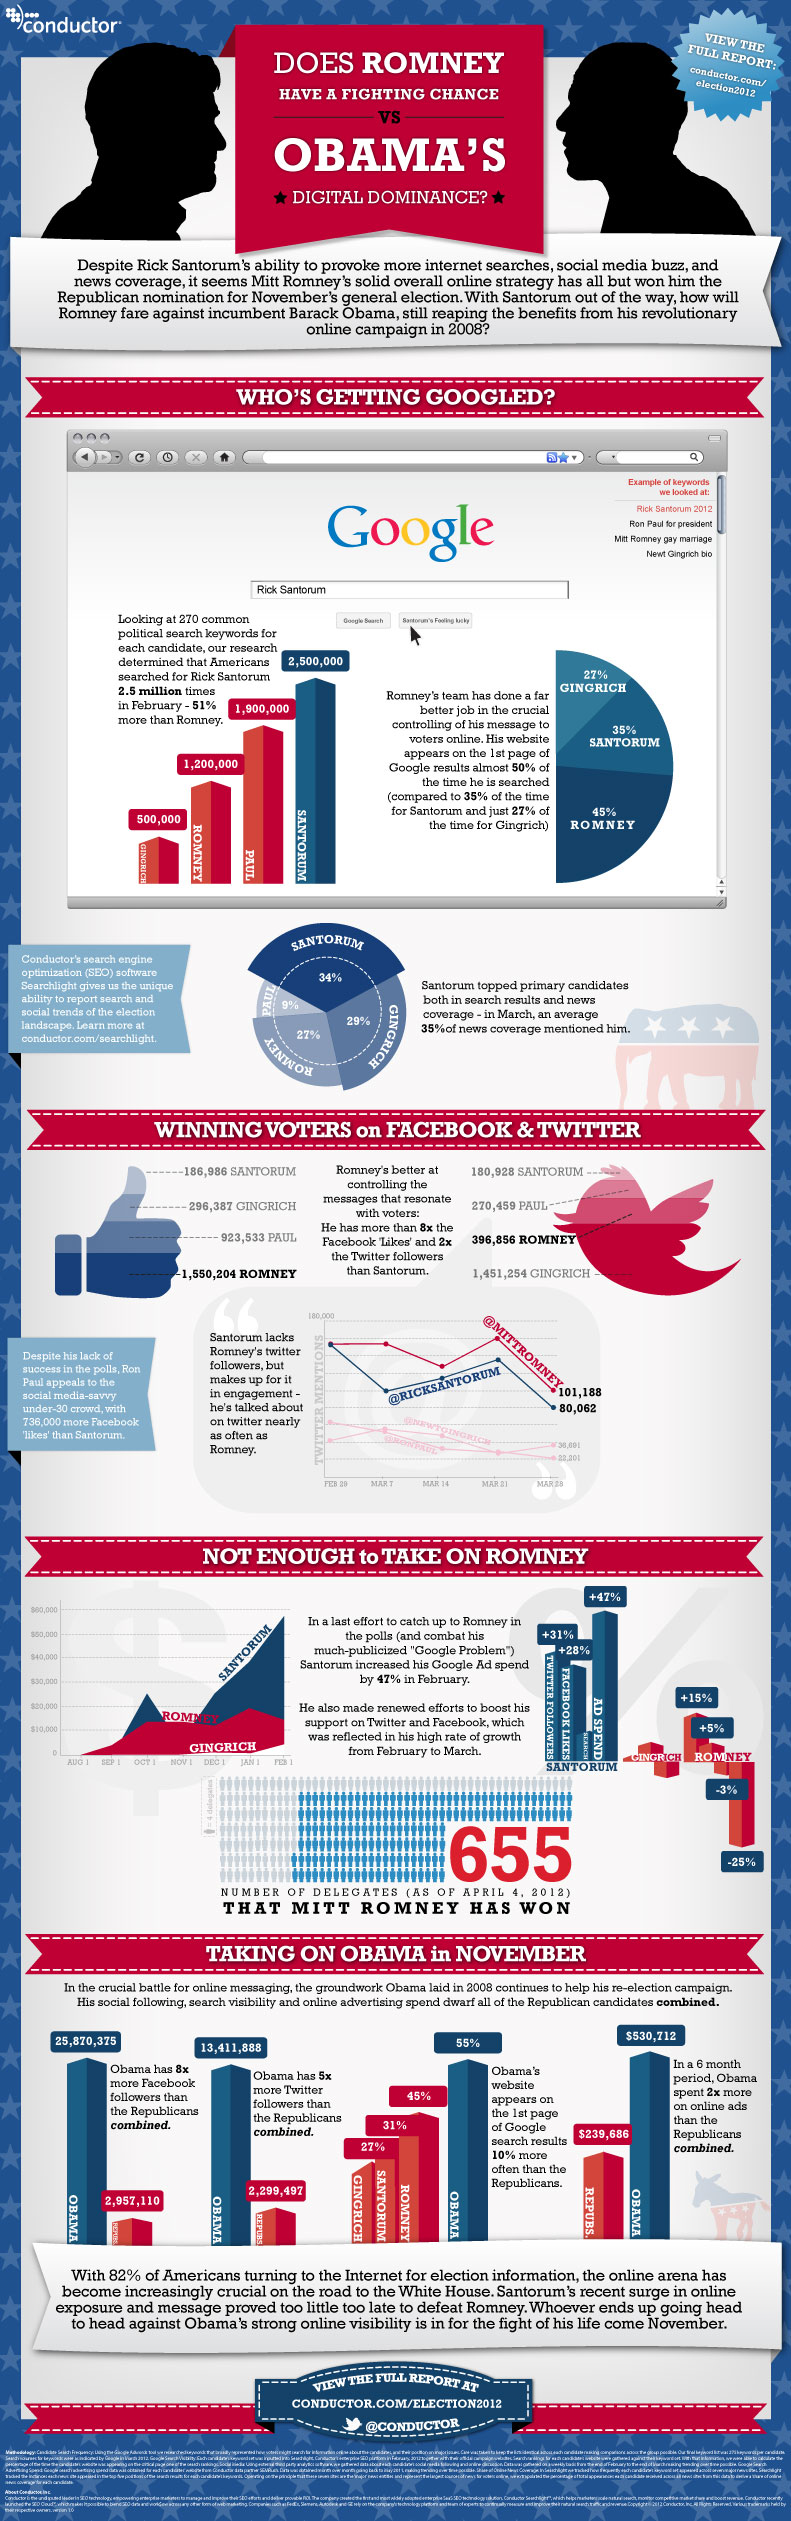 Conductor Political Infographic Election 2012